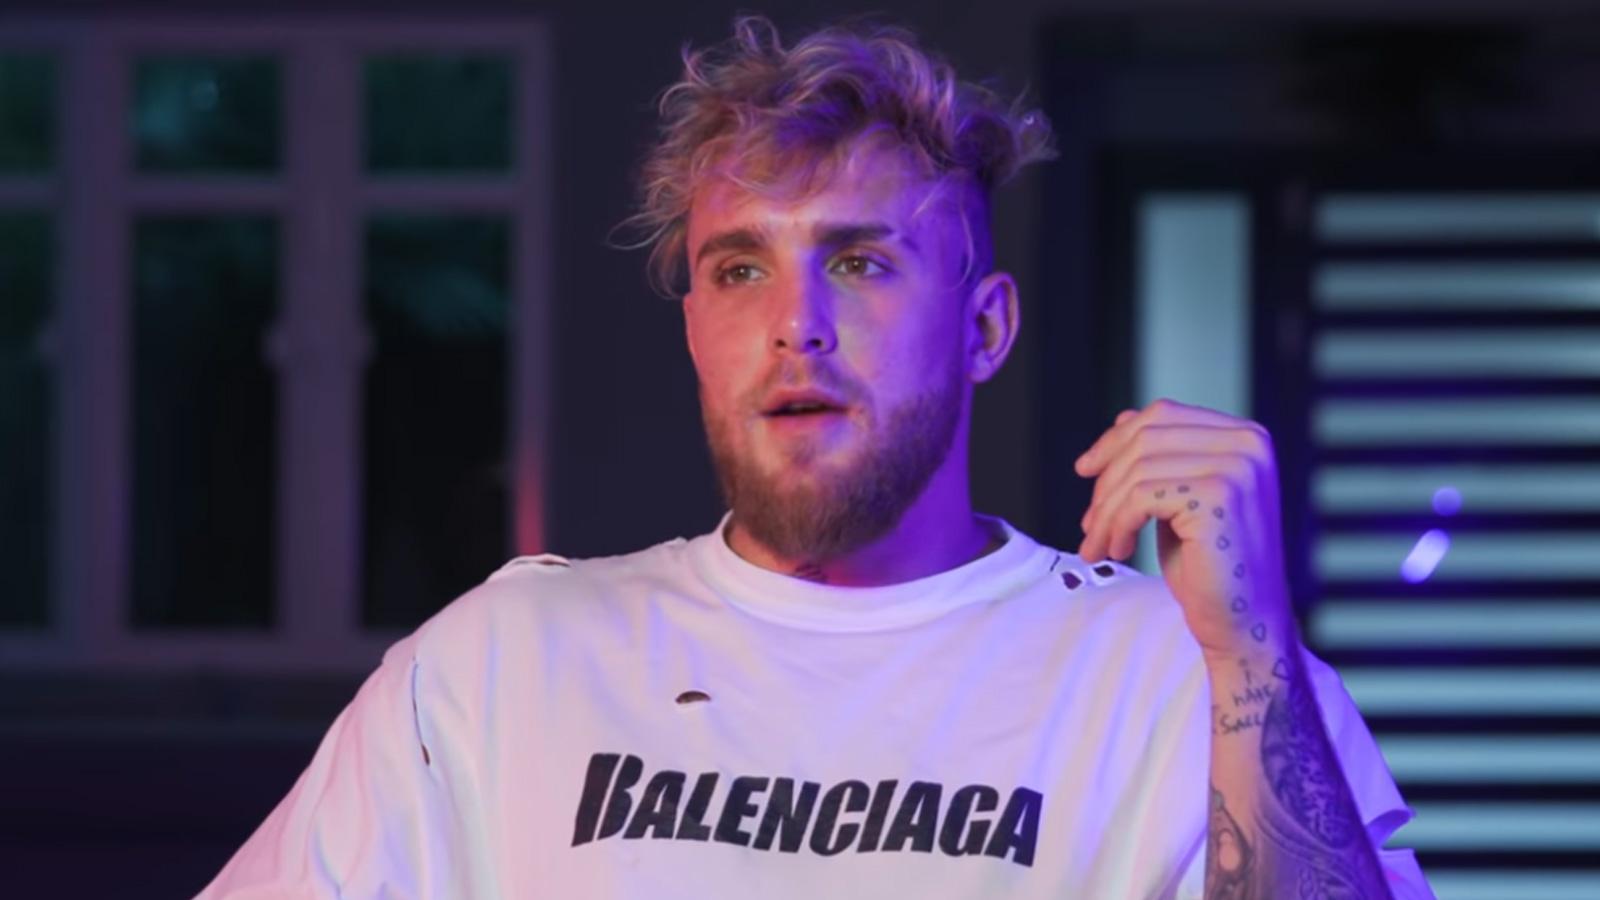 Jake Paul returned to YouTube with video